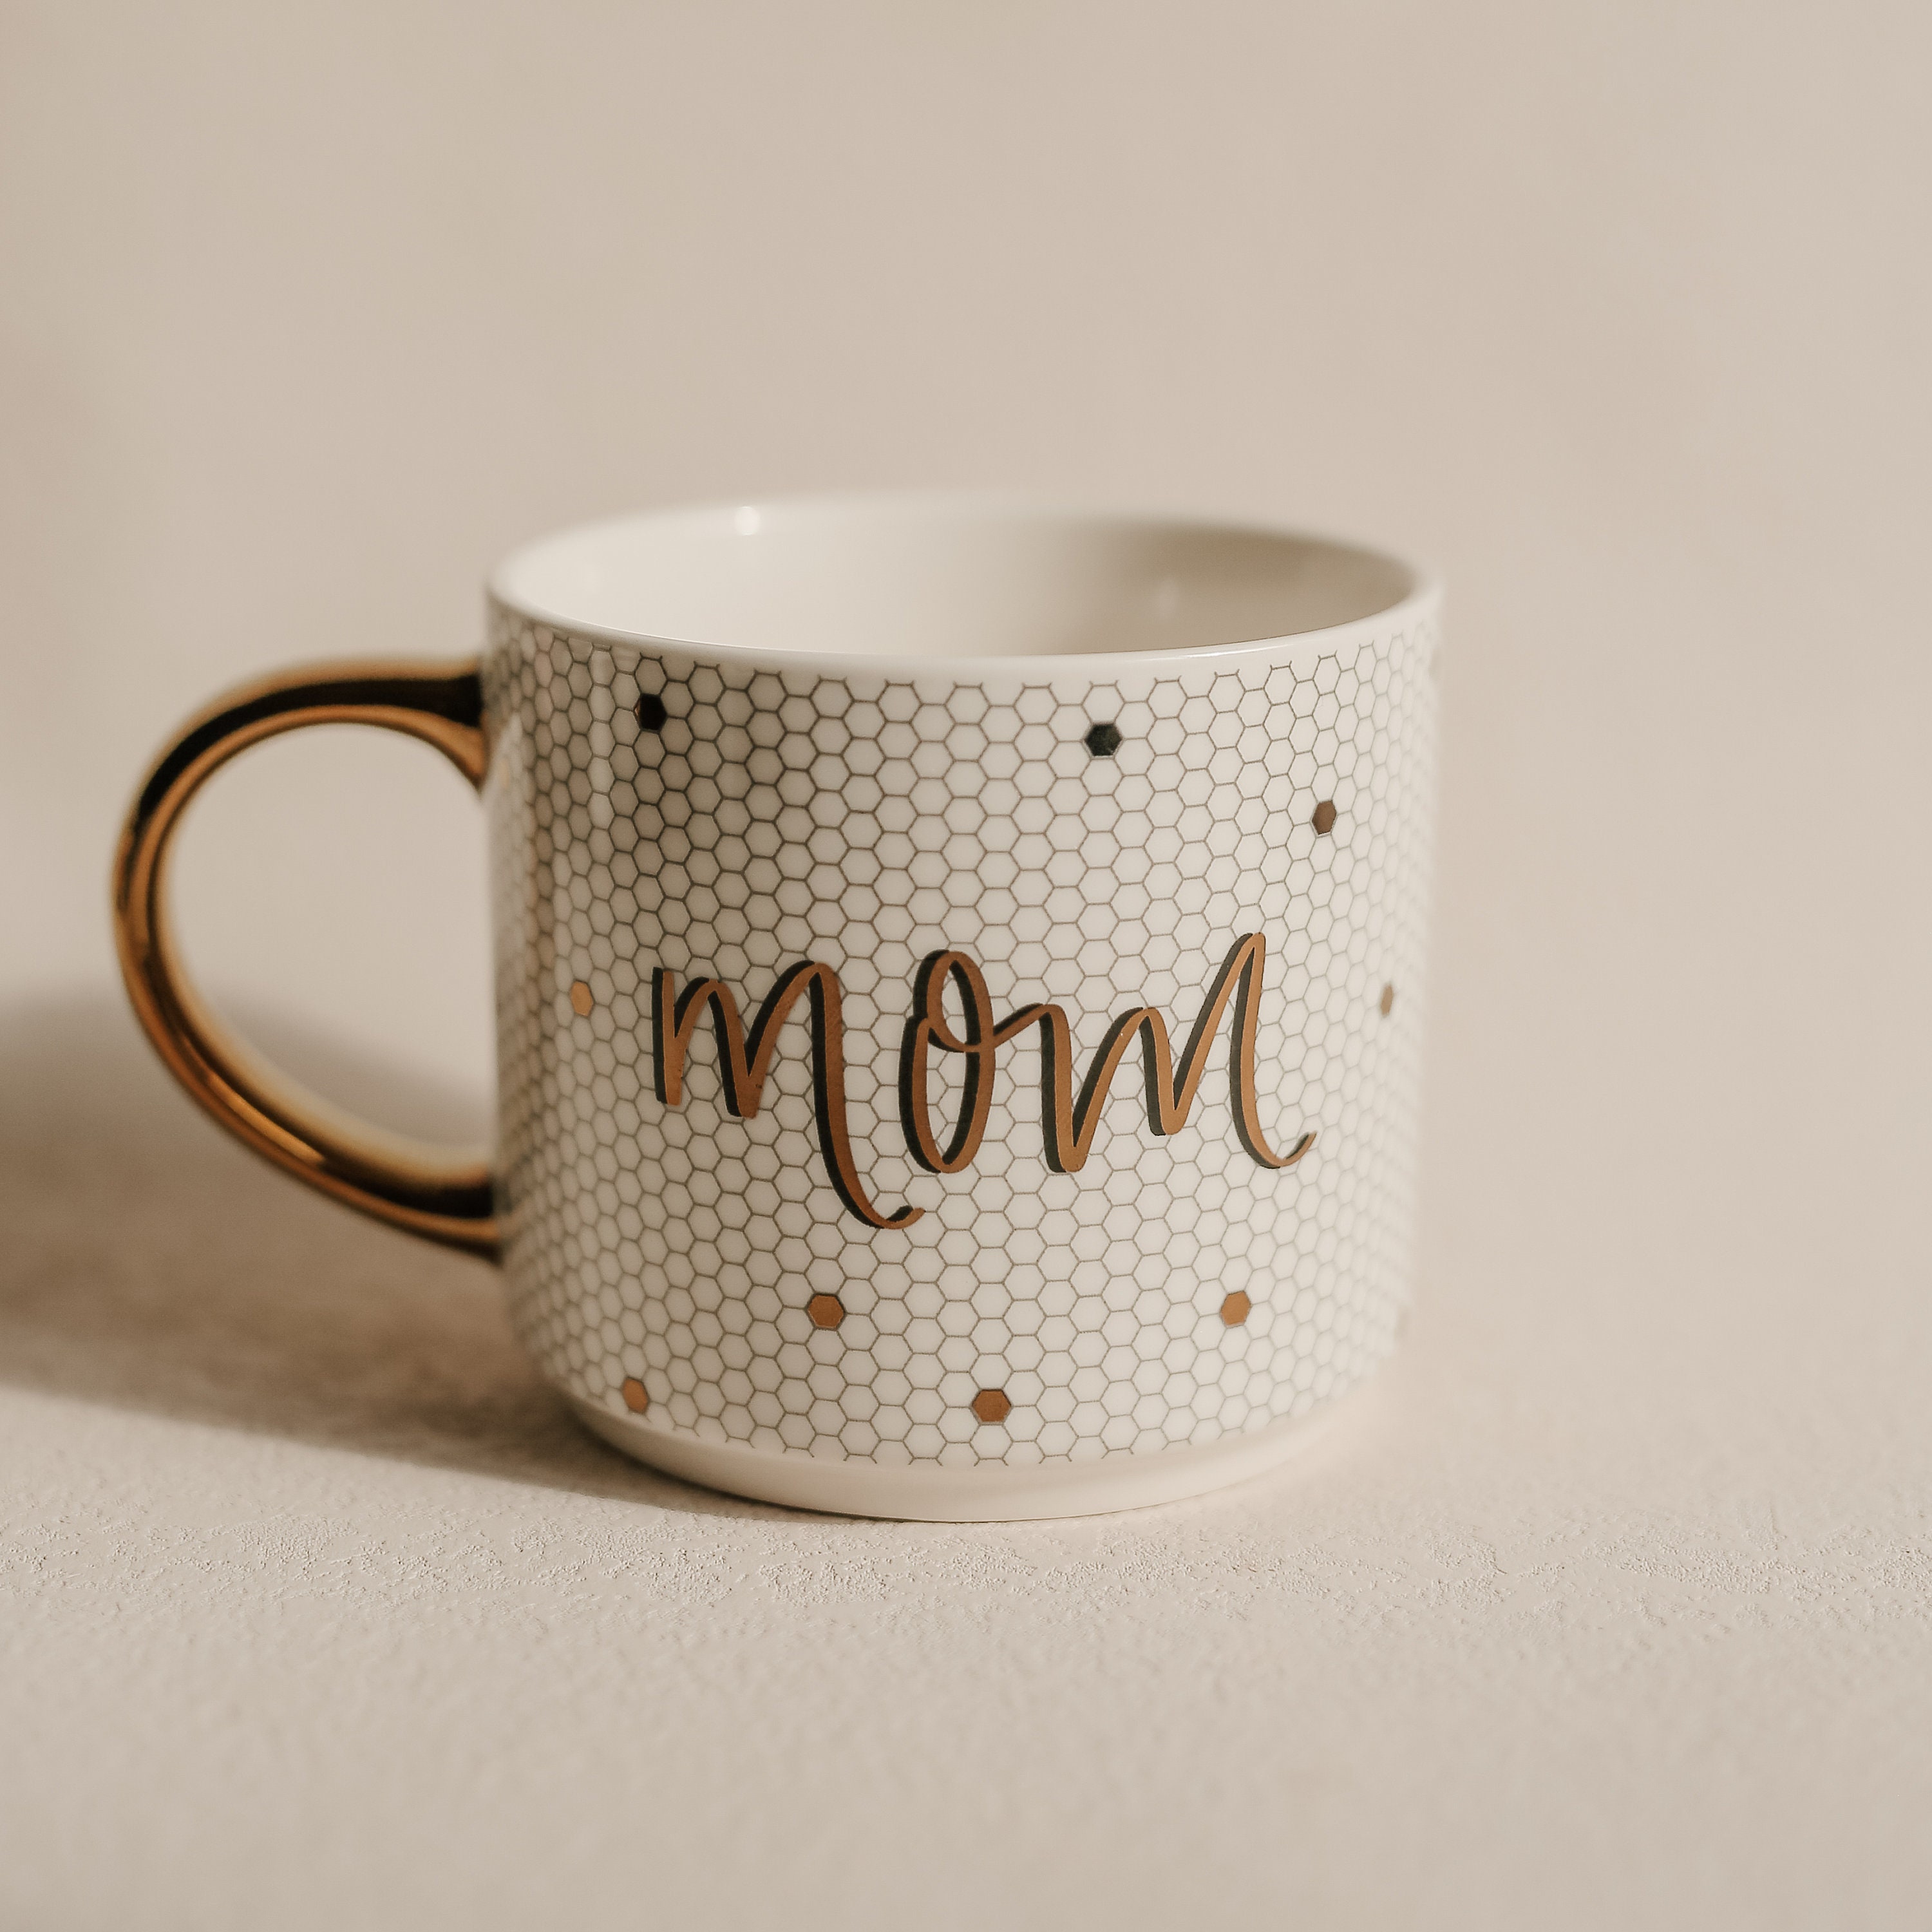 Multi Language Printed Coffee Mugs for Indian Moms in USA for Gifting